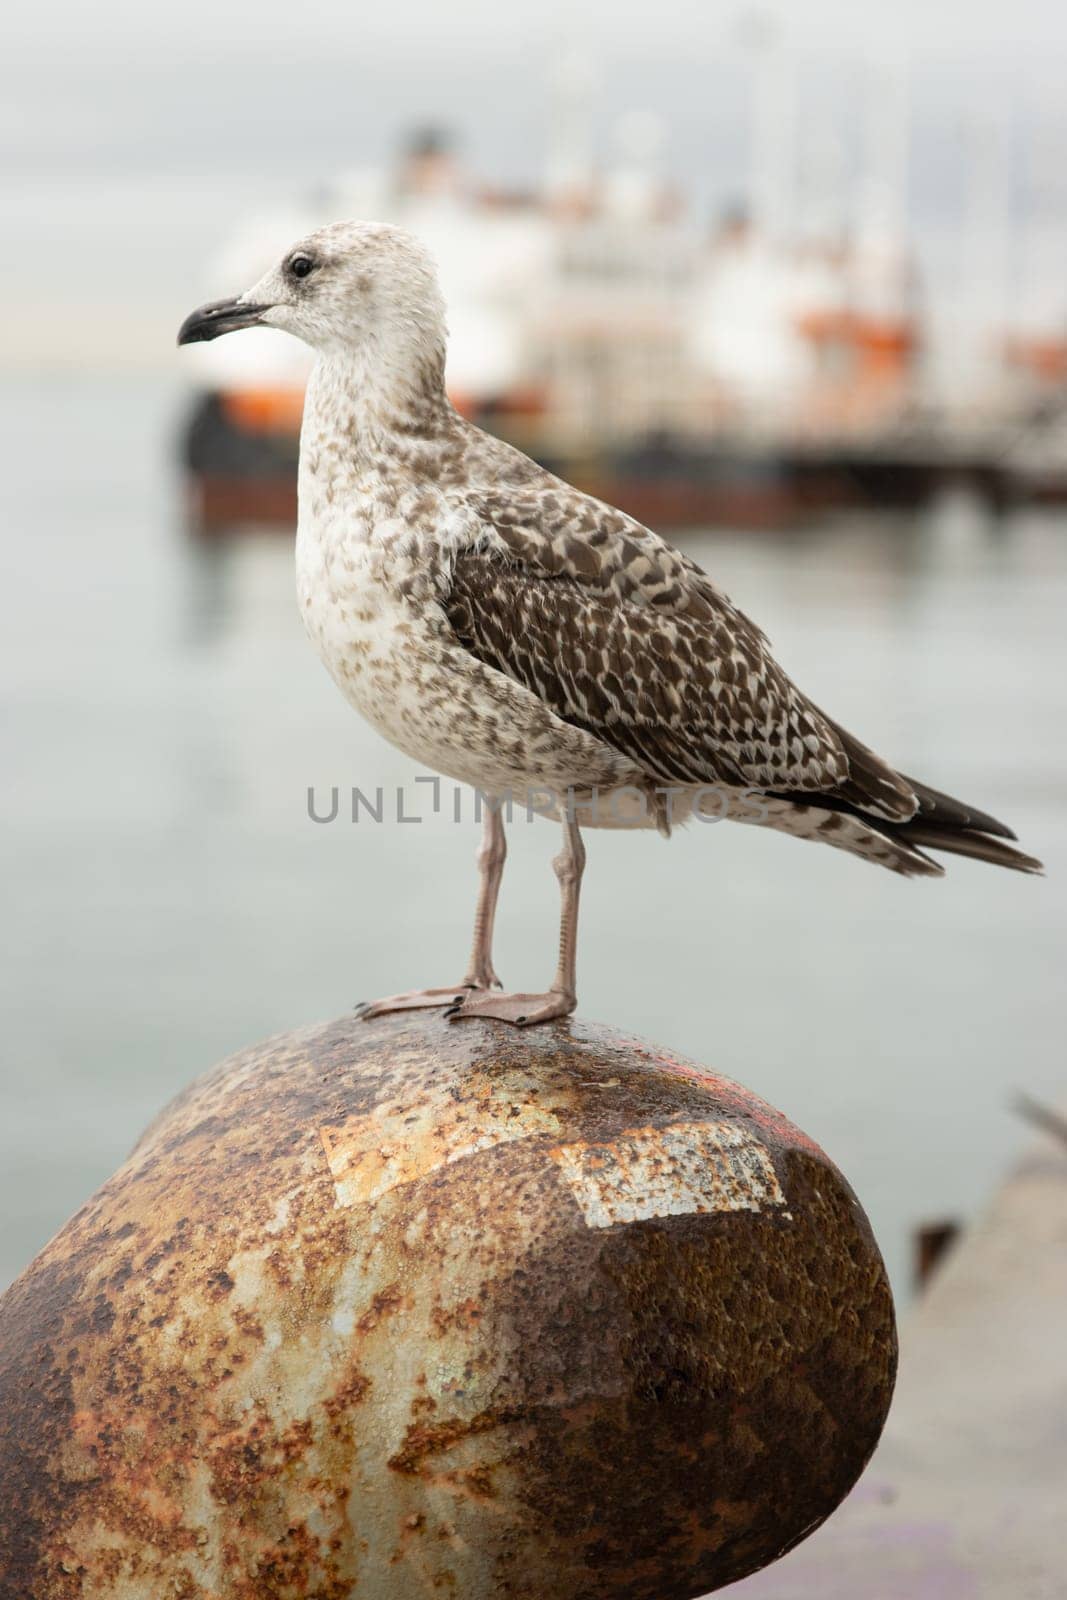 A gray gull stands on a rusty thing by the sea. Mid shot